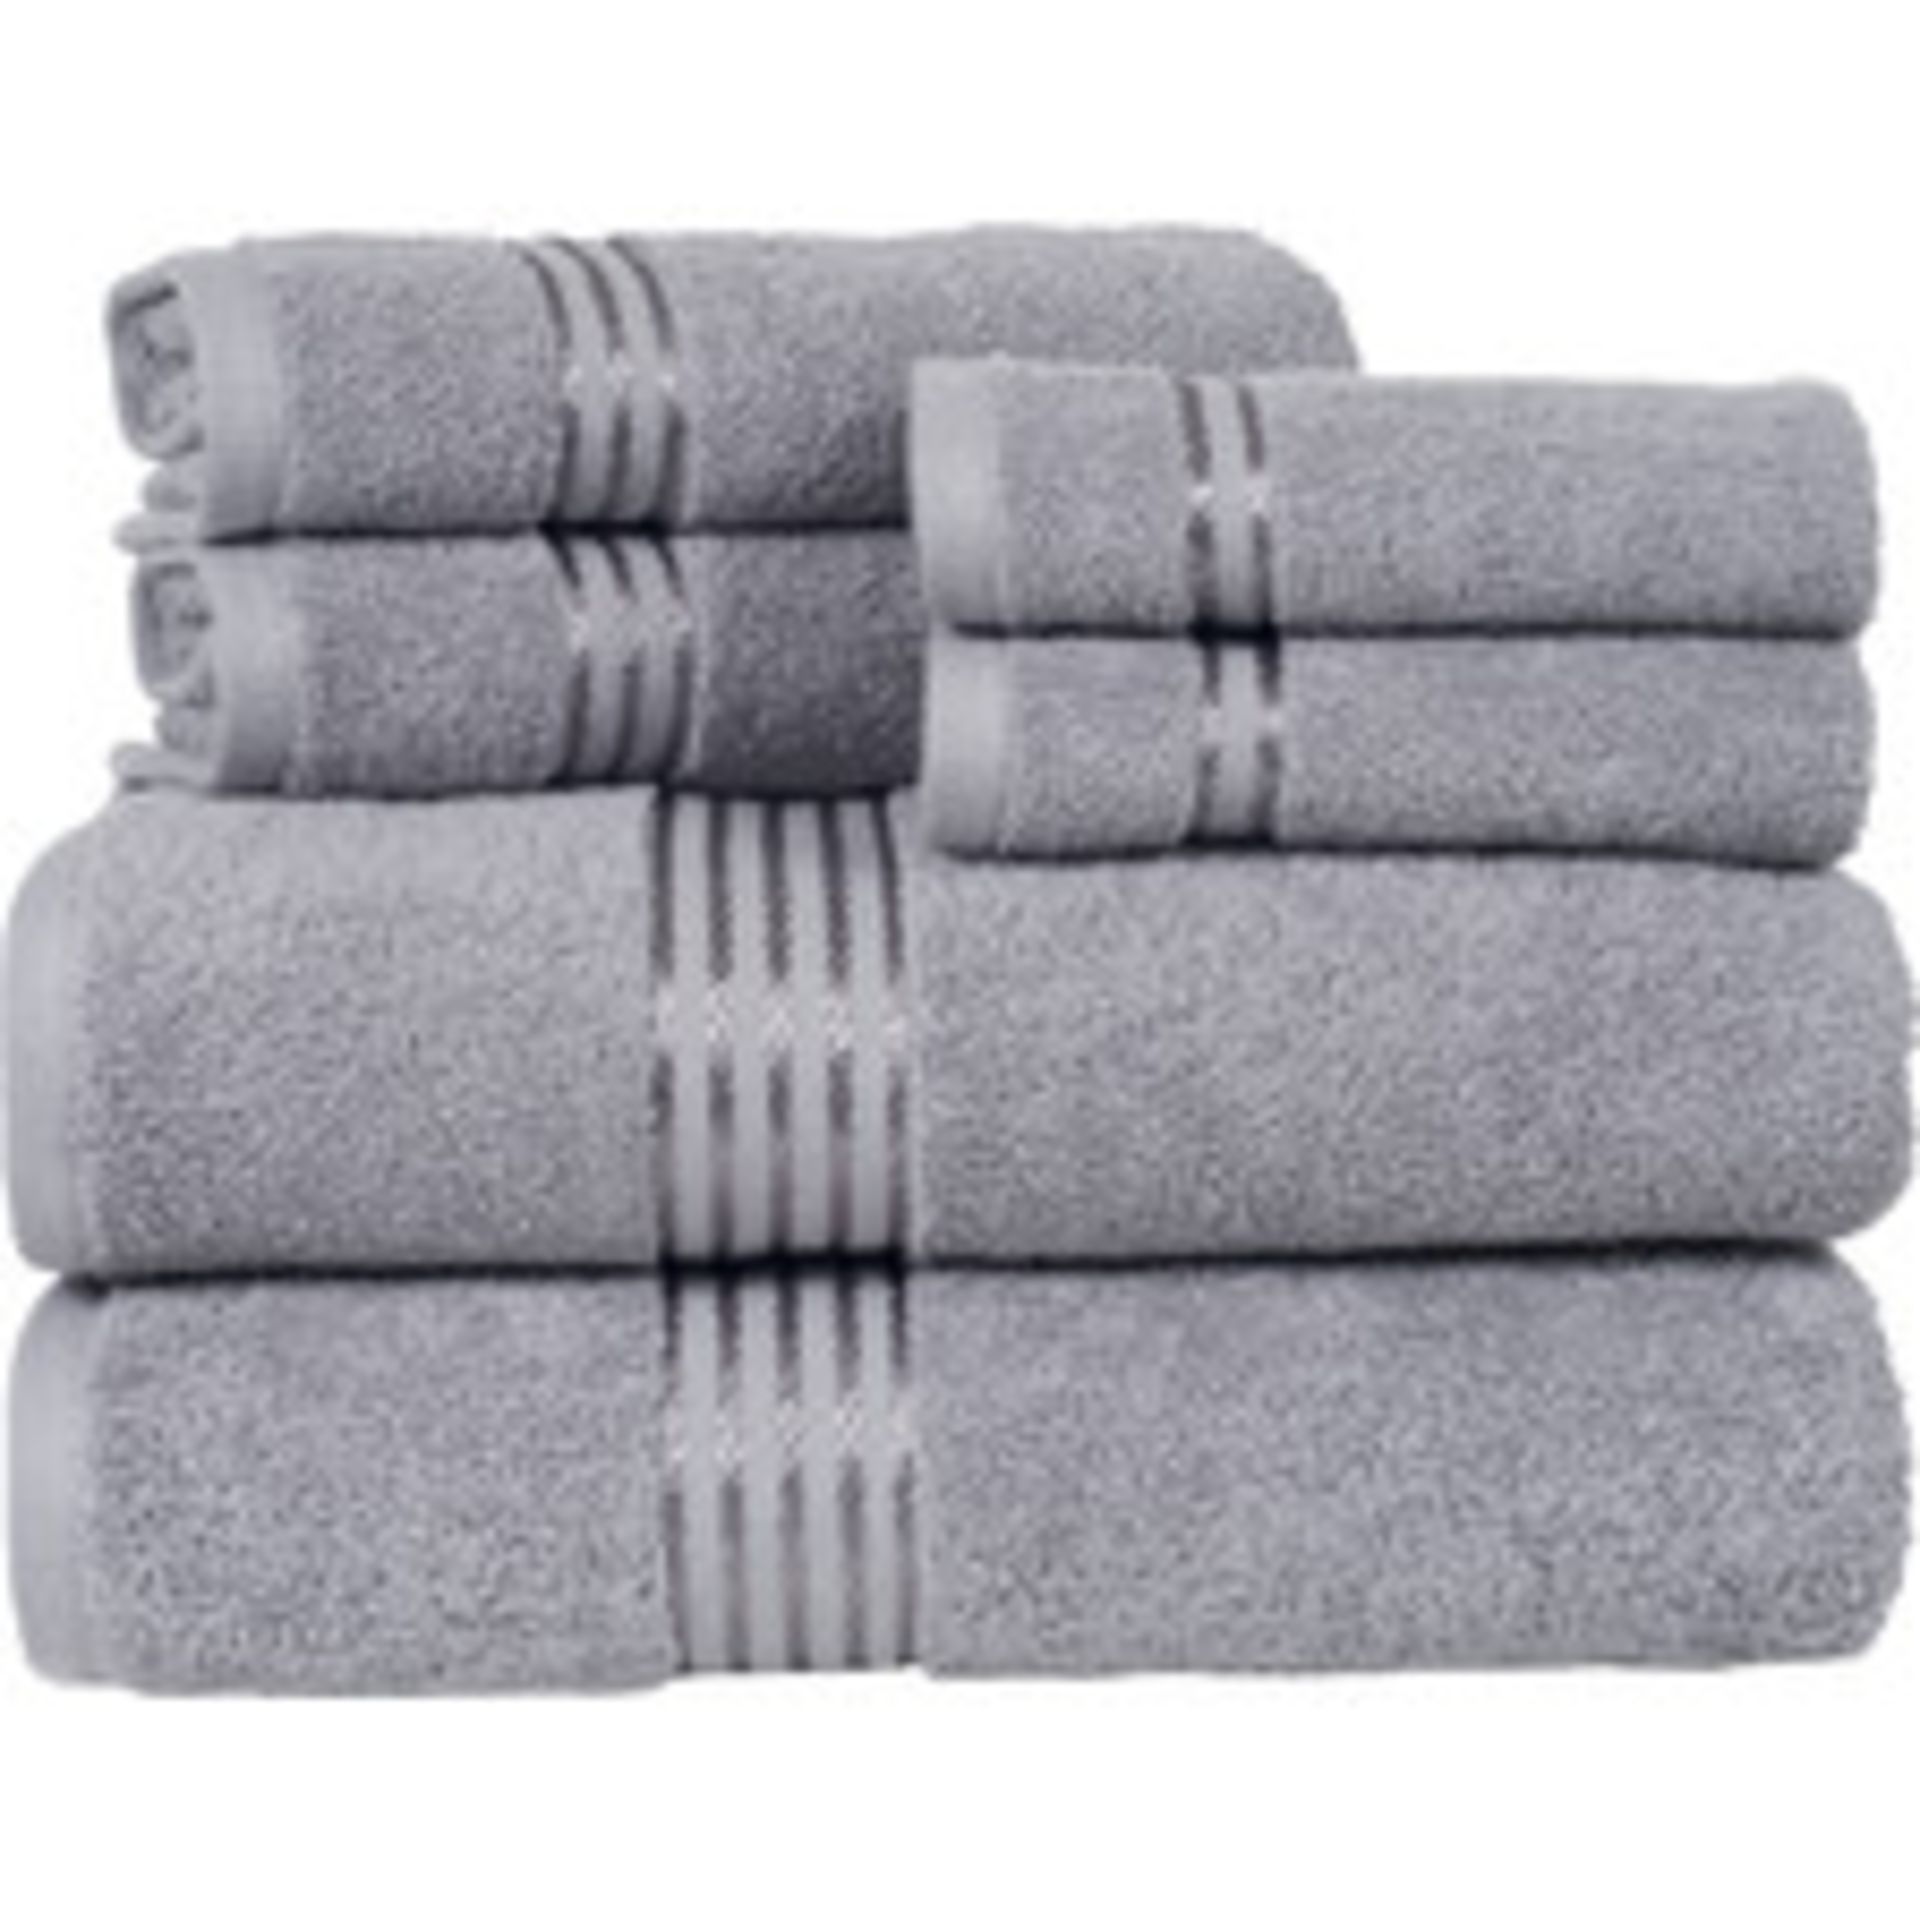 V *TRADE QTY* Brand New Silver 6 Piece Towel Bale Set With 2 Face Towels - 2 Hand Towels - 1 Bath